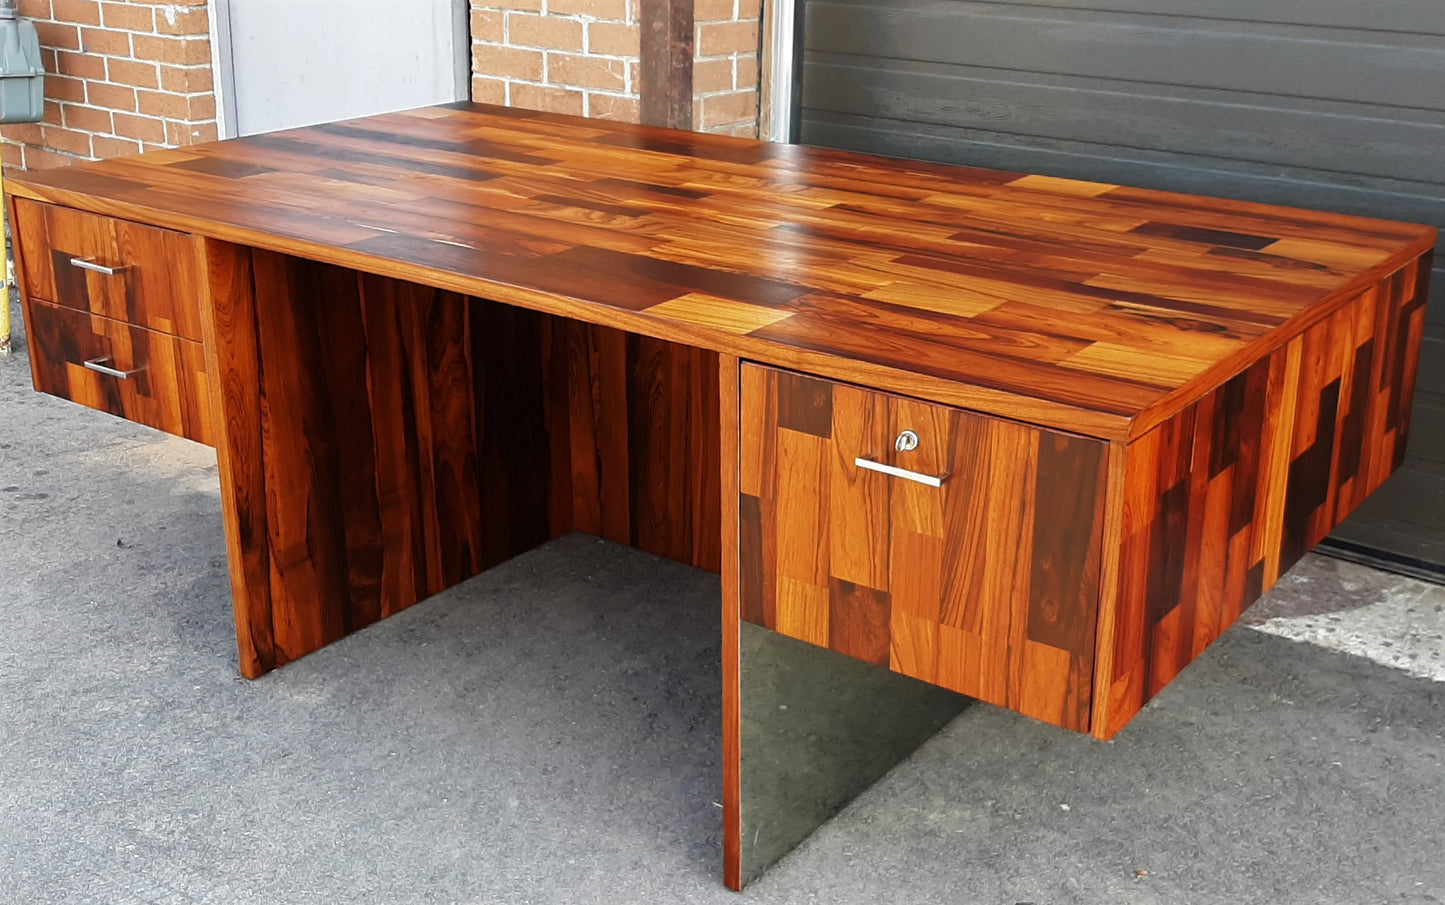 REFINISHED MCM rosewood & chrome desk with finished back Milo Baughman style, perfect